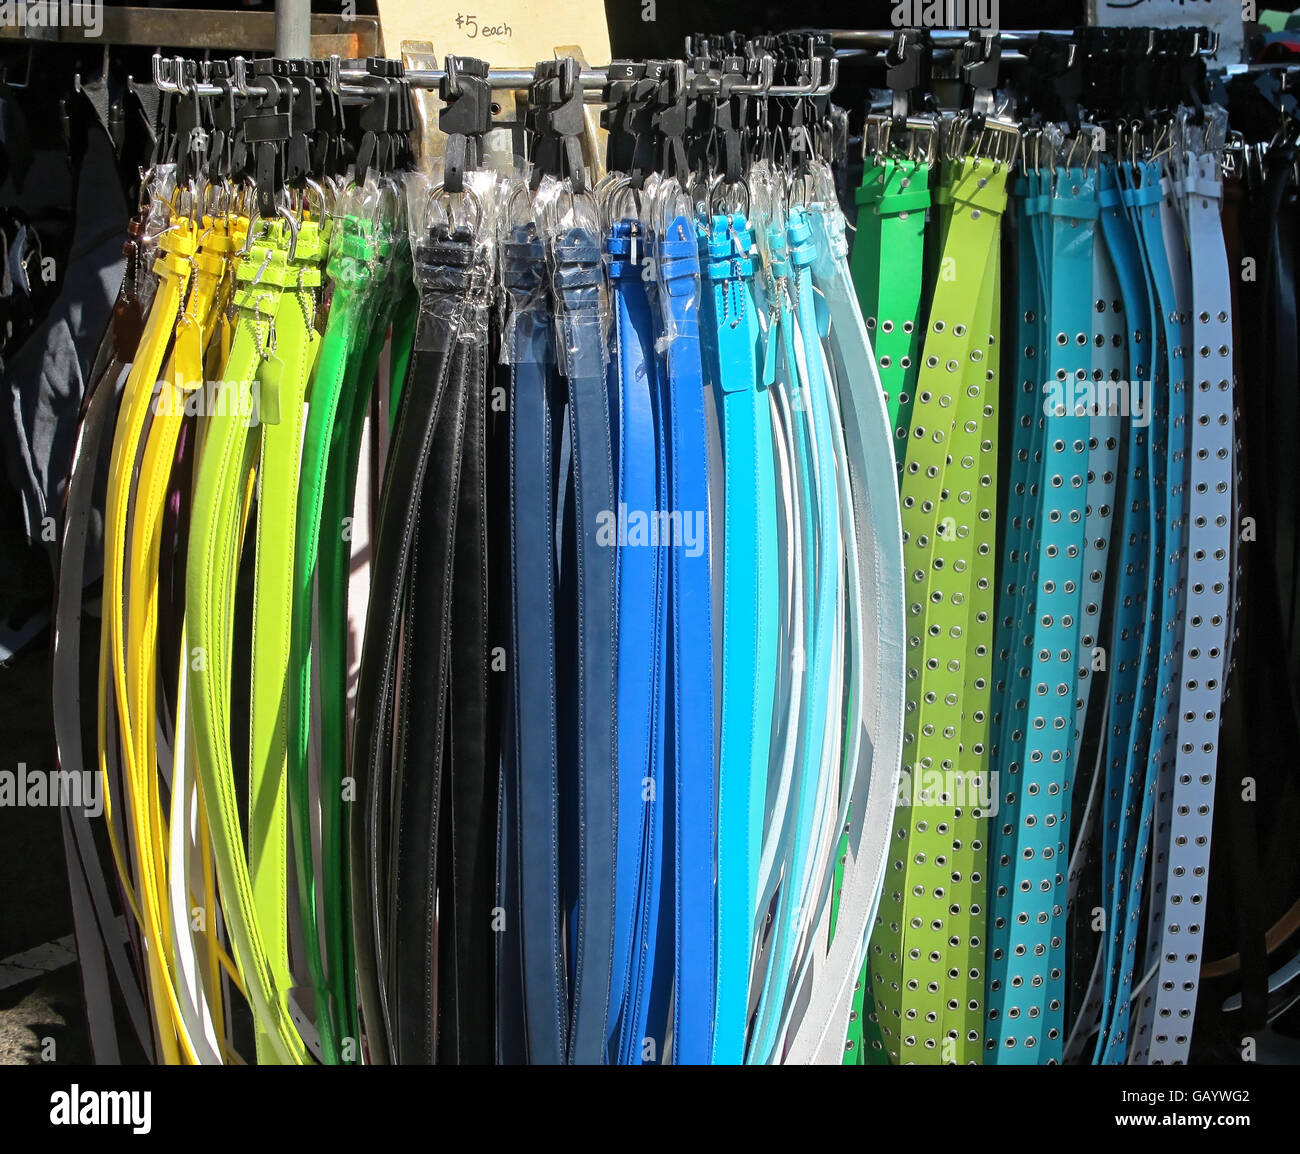 Colorful fashion belts at an outdoor market. Stock Photo